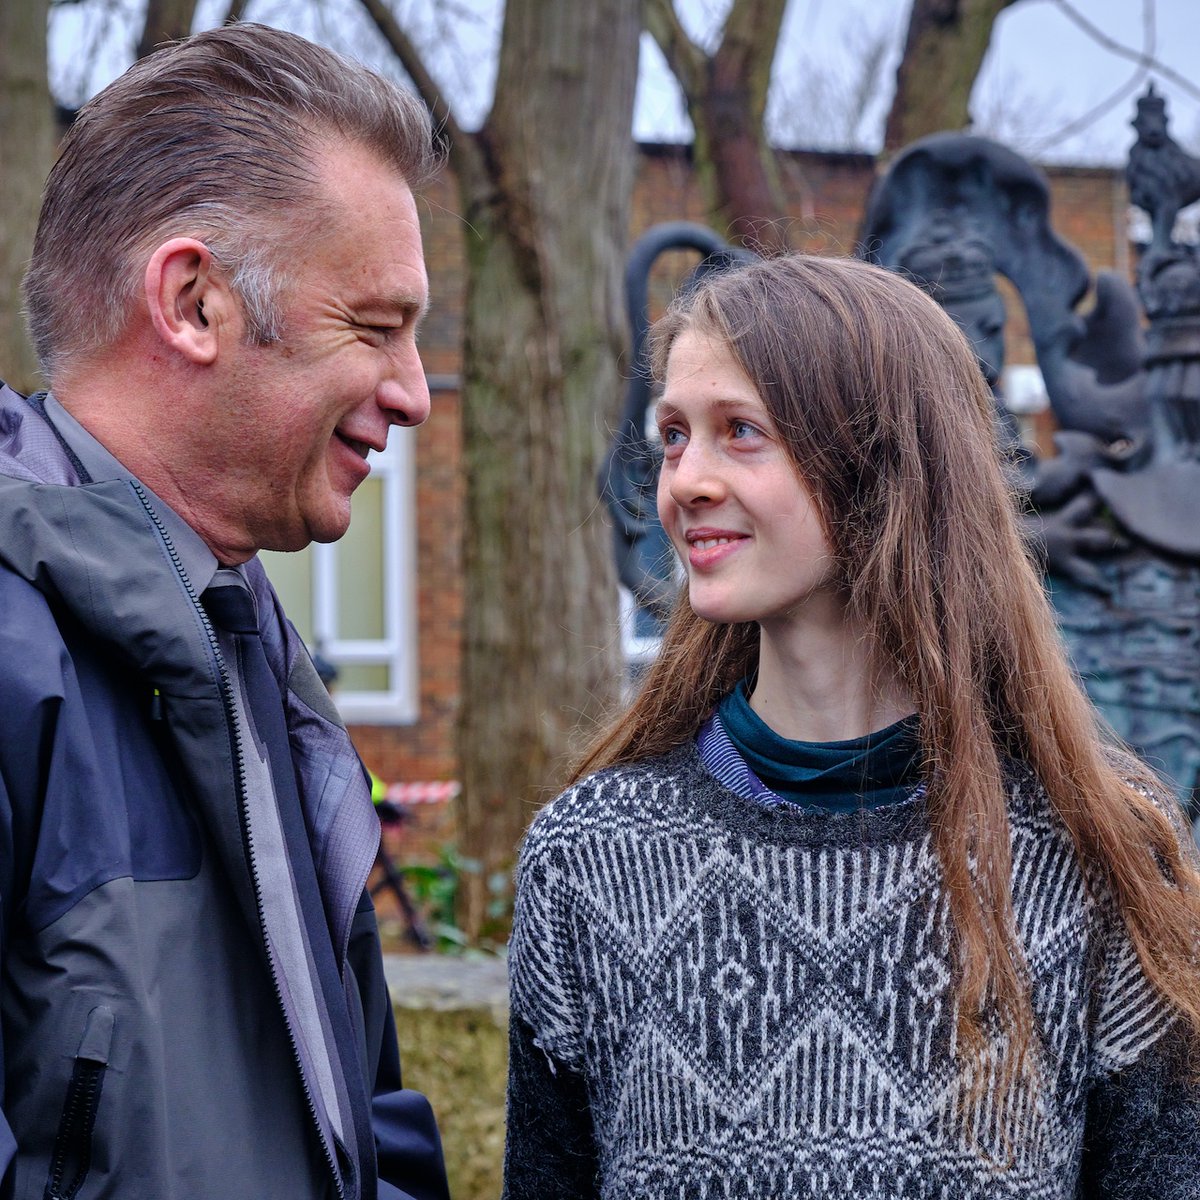 I would class this as a good day! Happy birthday to the indefatigable @ChrisGPackham and happy day to enjoy fresh(ish) air - as Cressie is not going to prison! Good people.